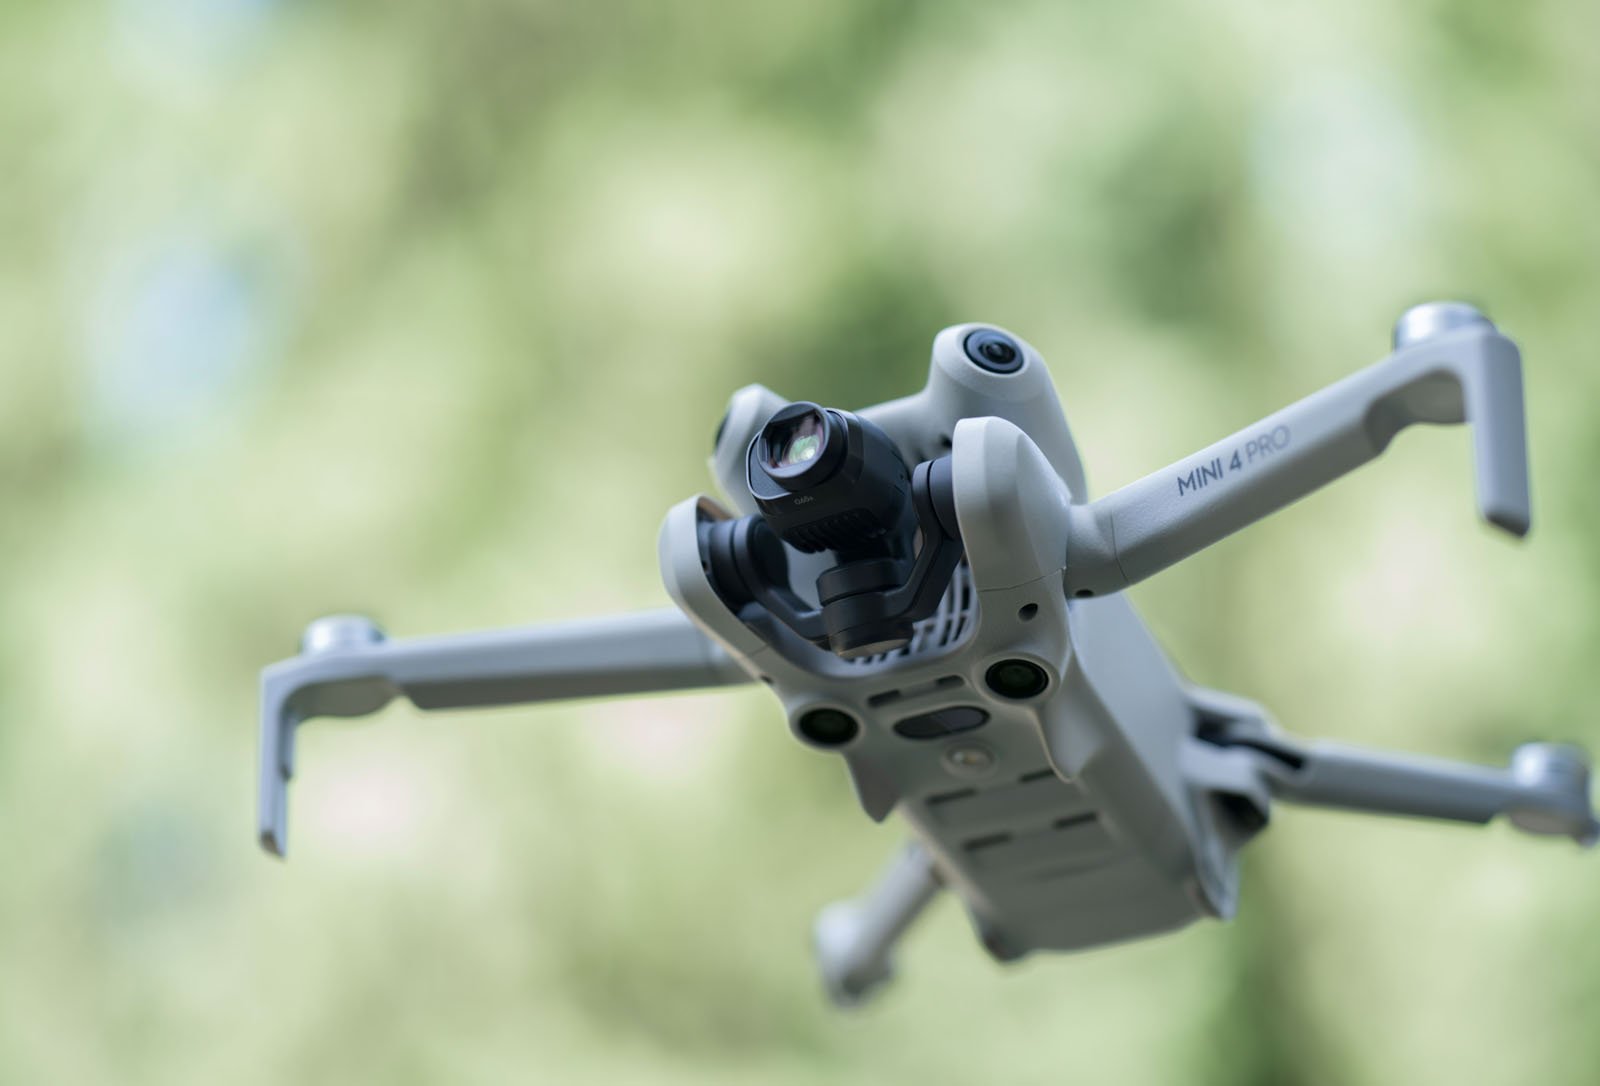 DJI Mini 4 Pro is a Sub-249g 48MP 4K Camera Drone that is Easier to Fly